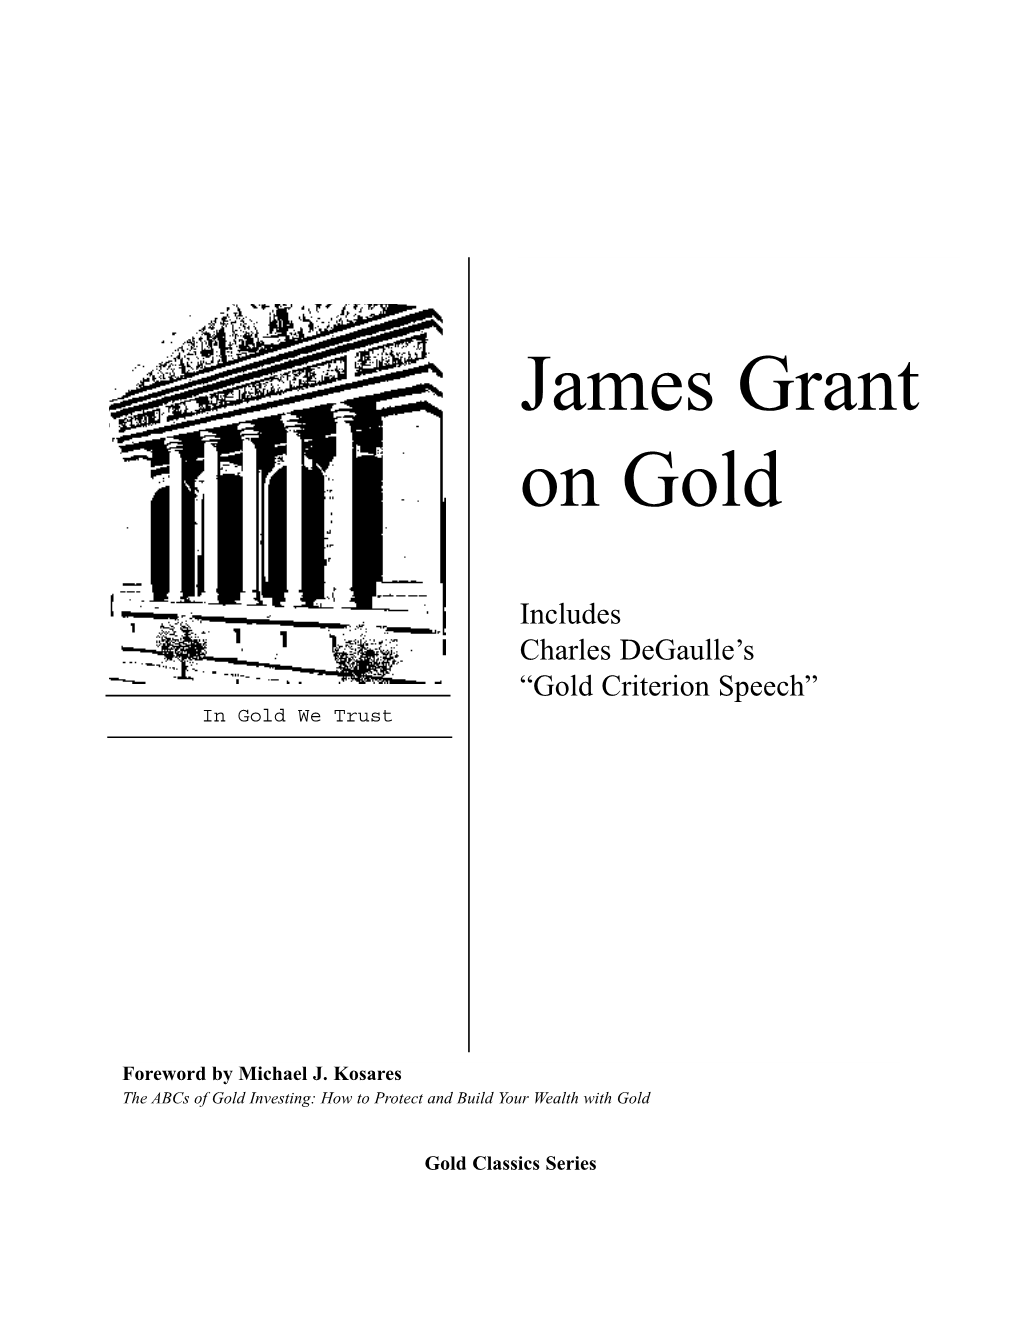 James Grant on Gold